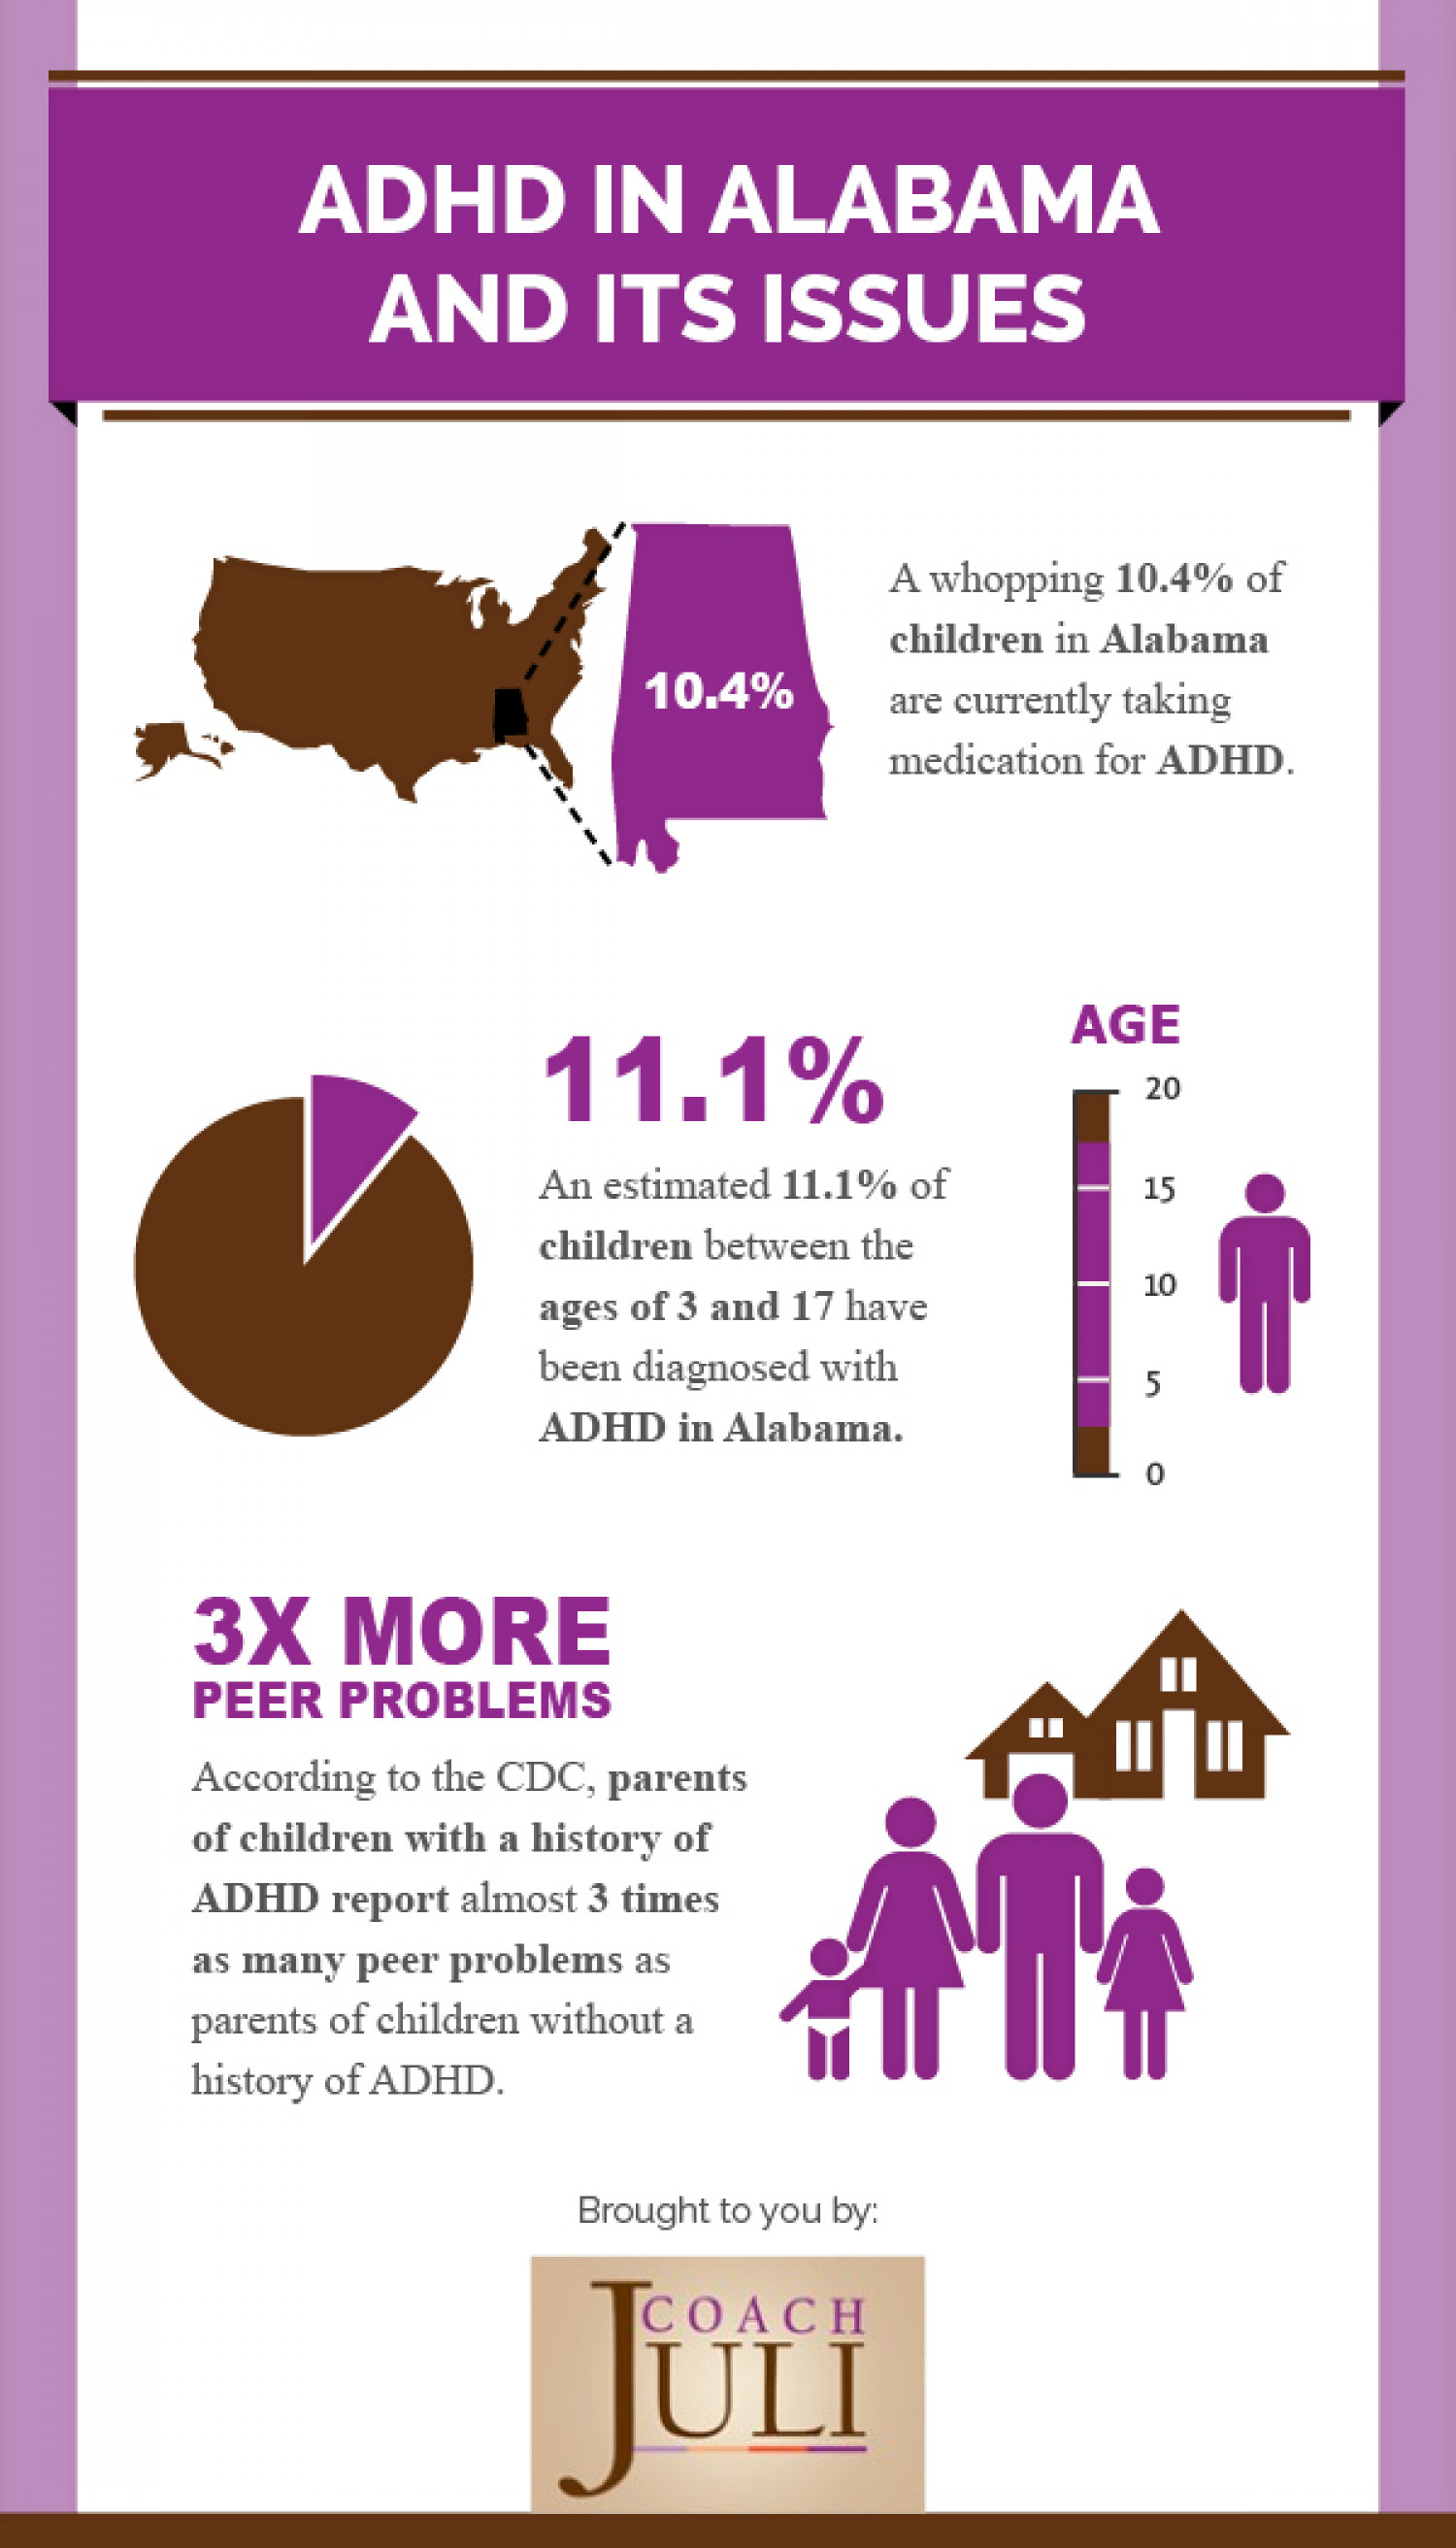 ADHD in Alabama Infographic